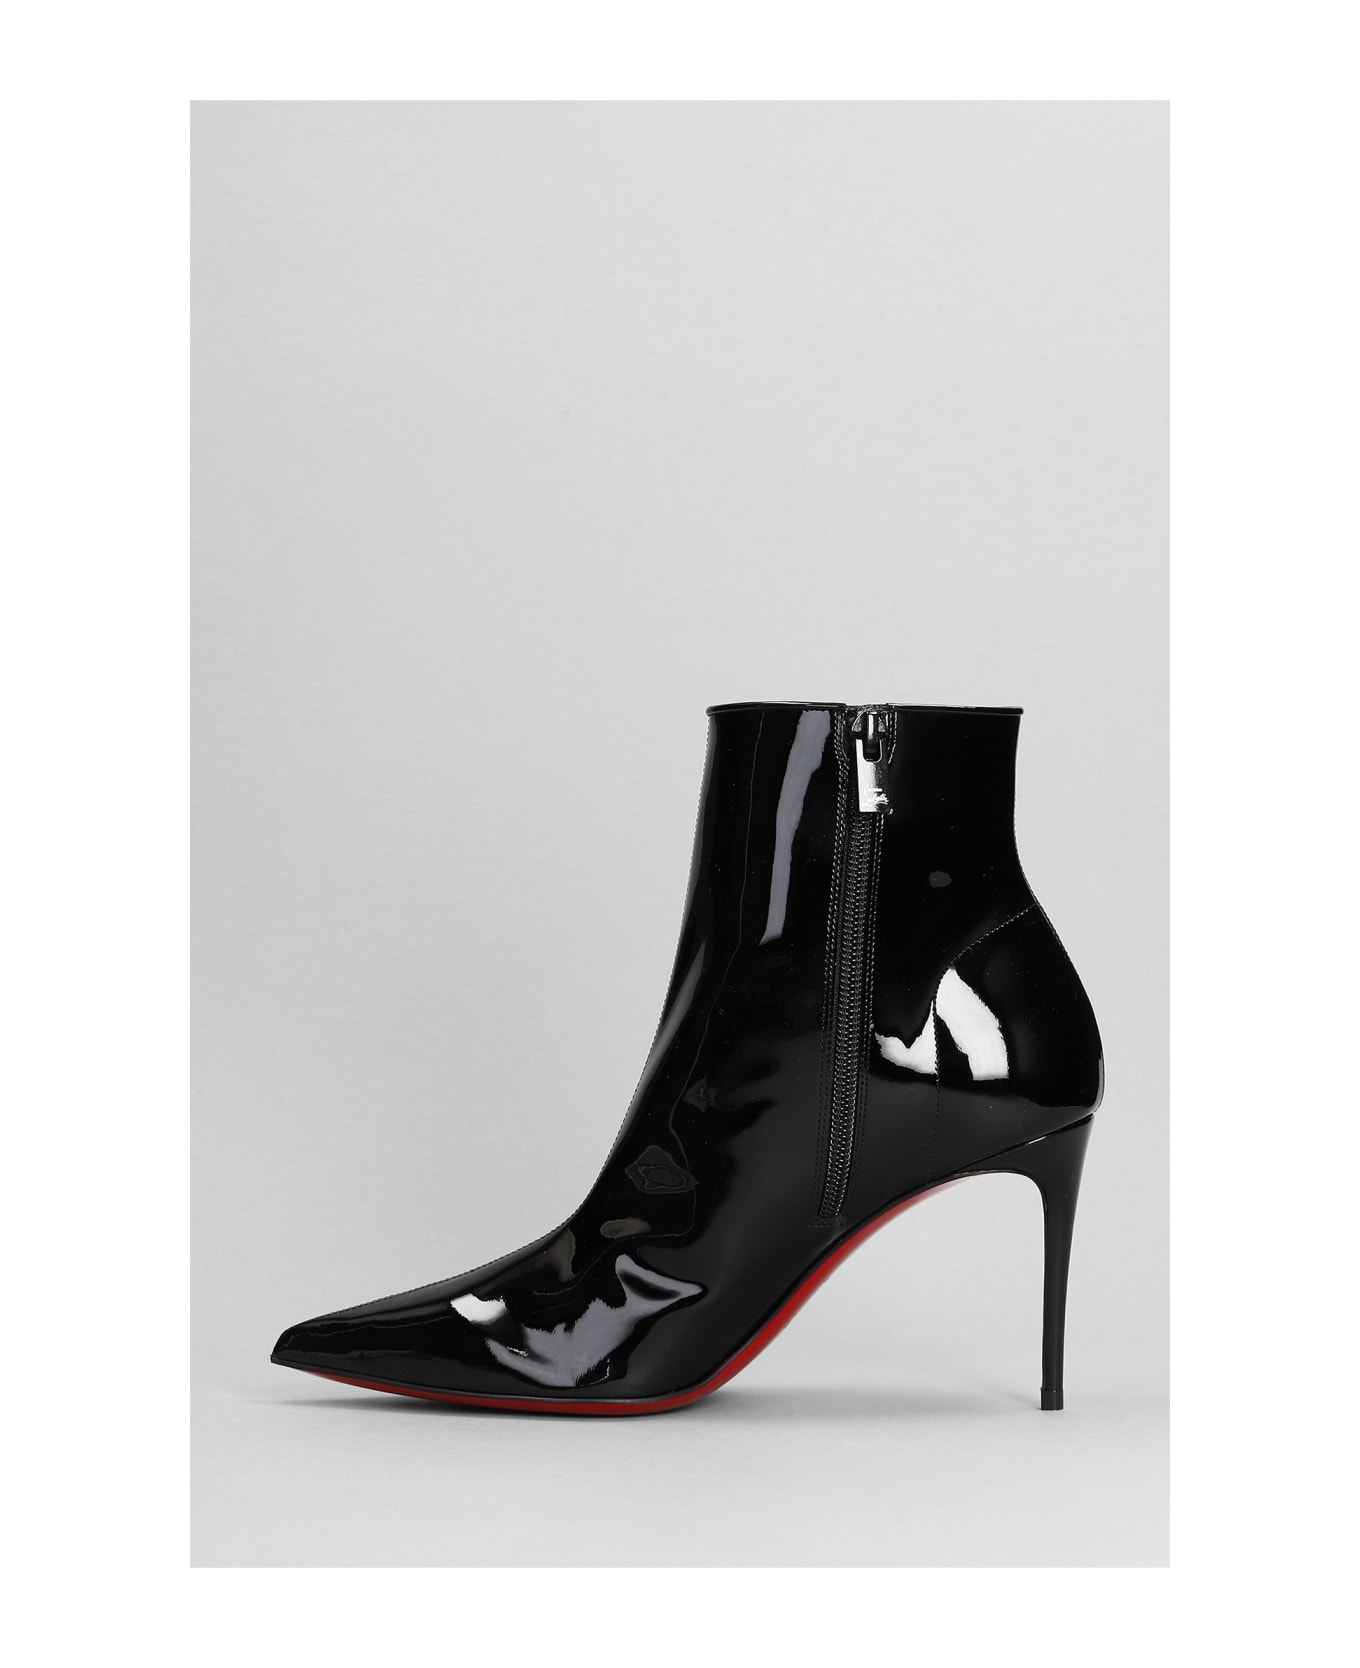 Christian Louboutin Sporty Kate Booty High Heels Ankle Boots In Black Patent Leather - black